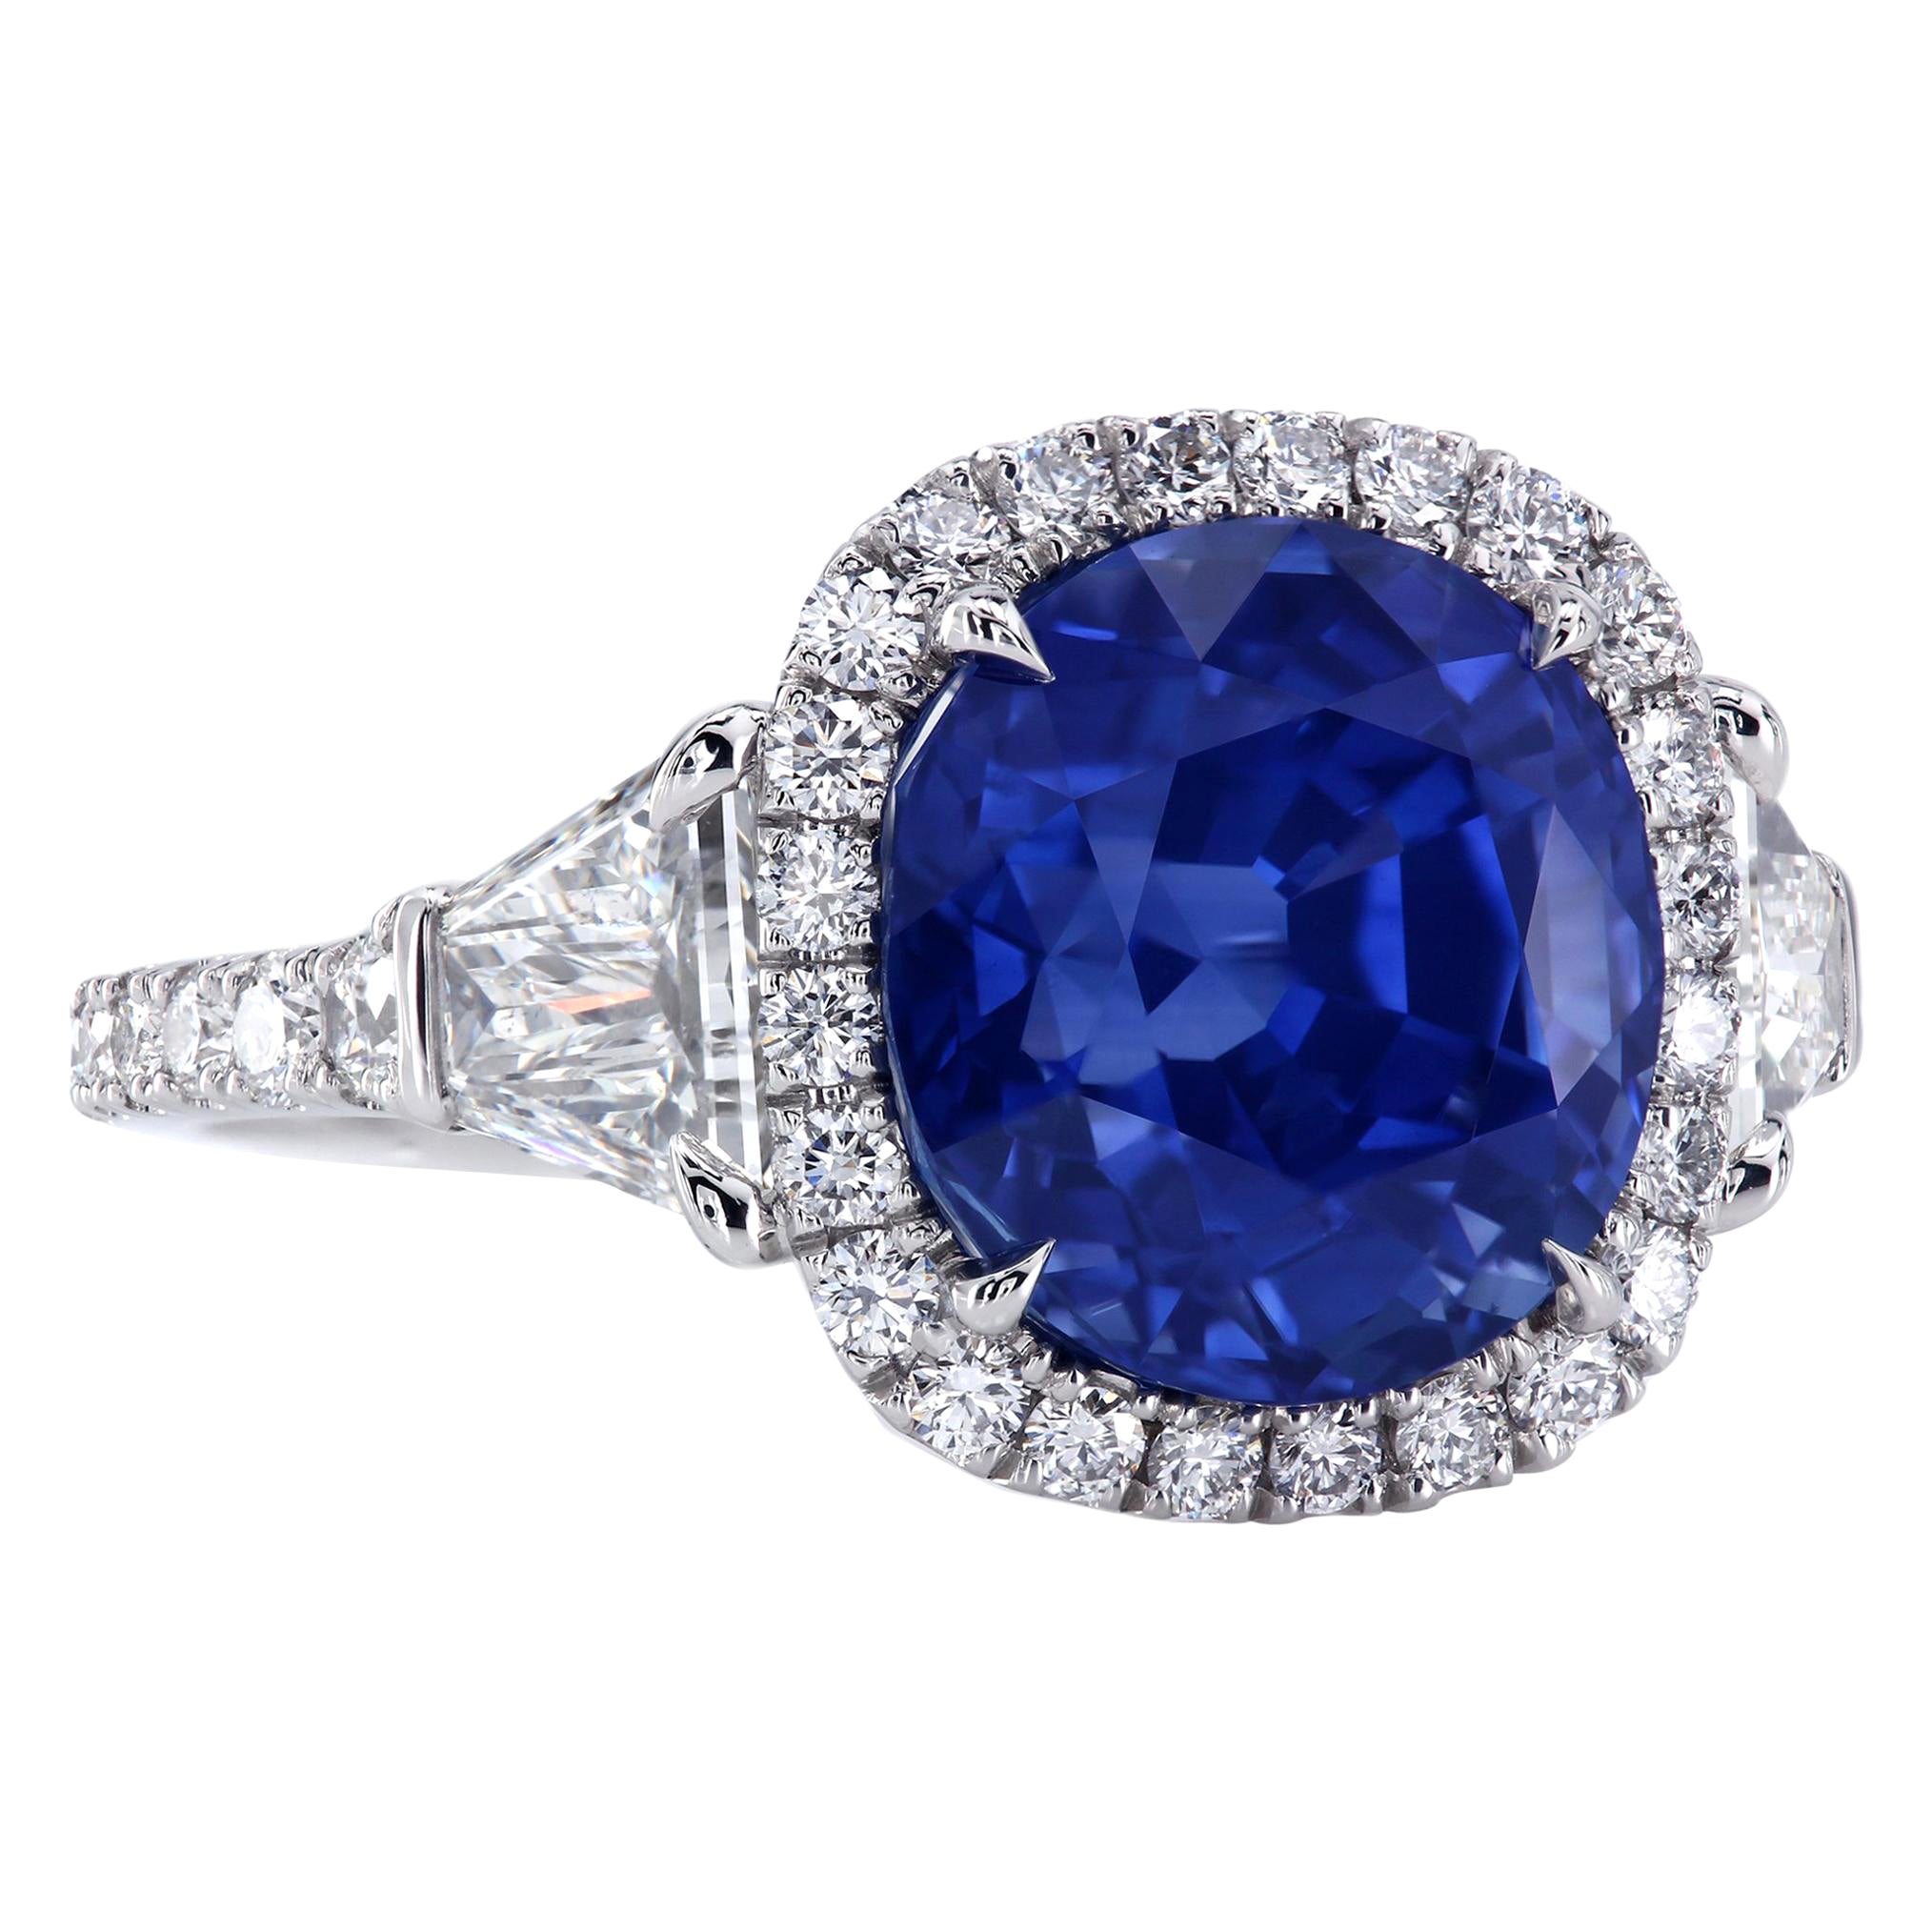 Leon Mege Halo Platinum Three-stone Ring with Certified Blue Cushion Sapphire 